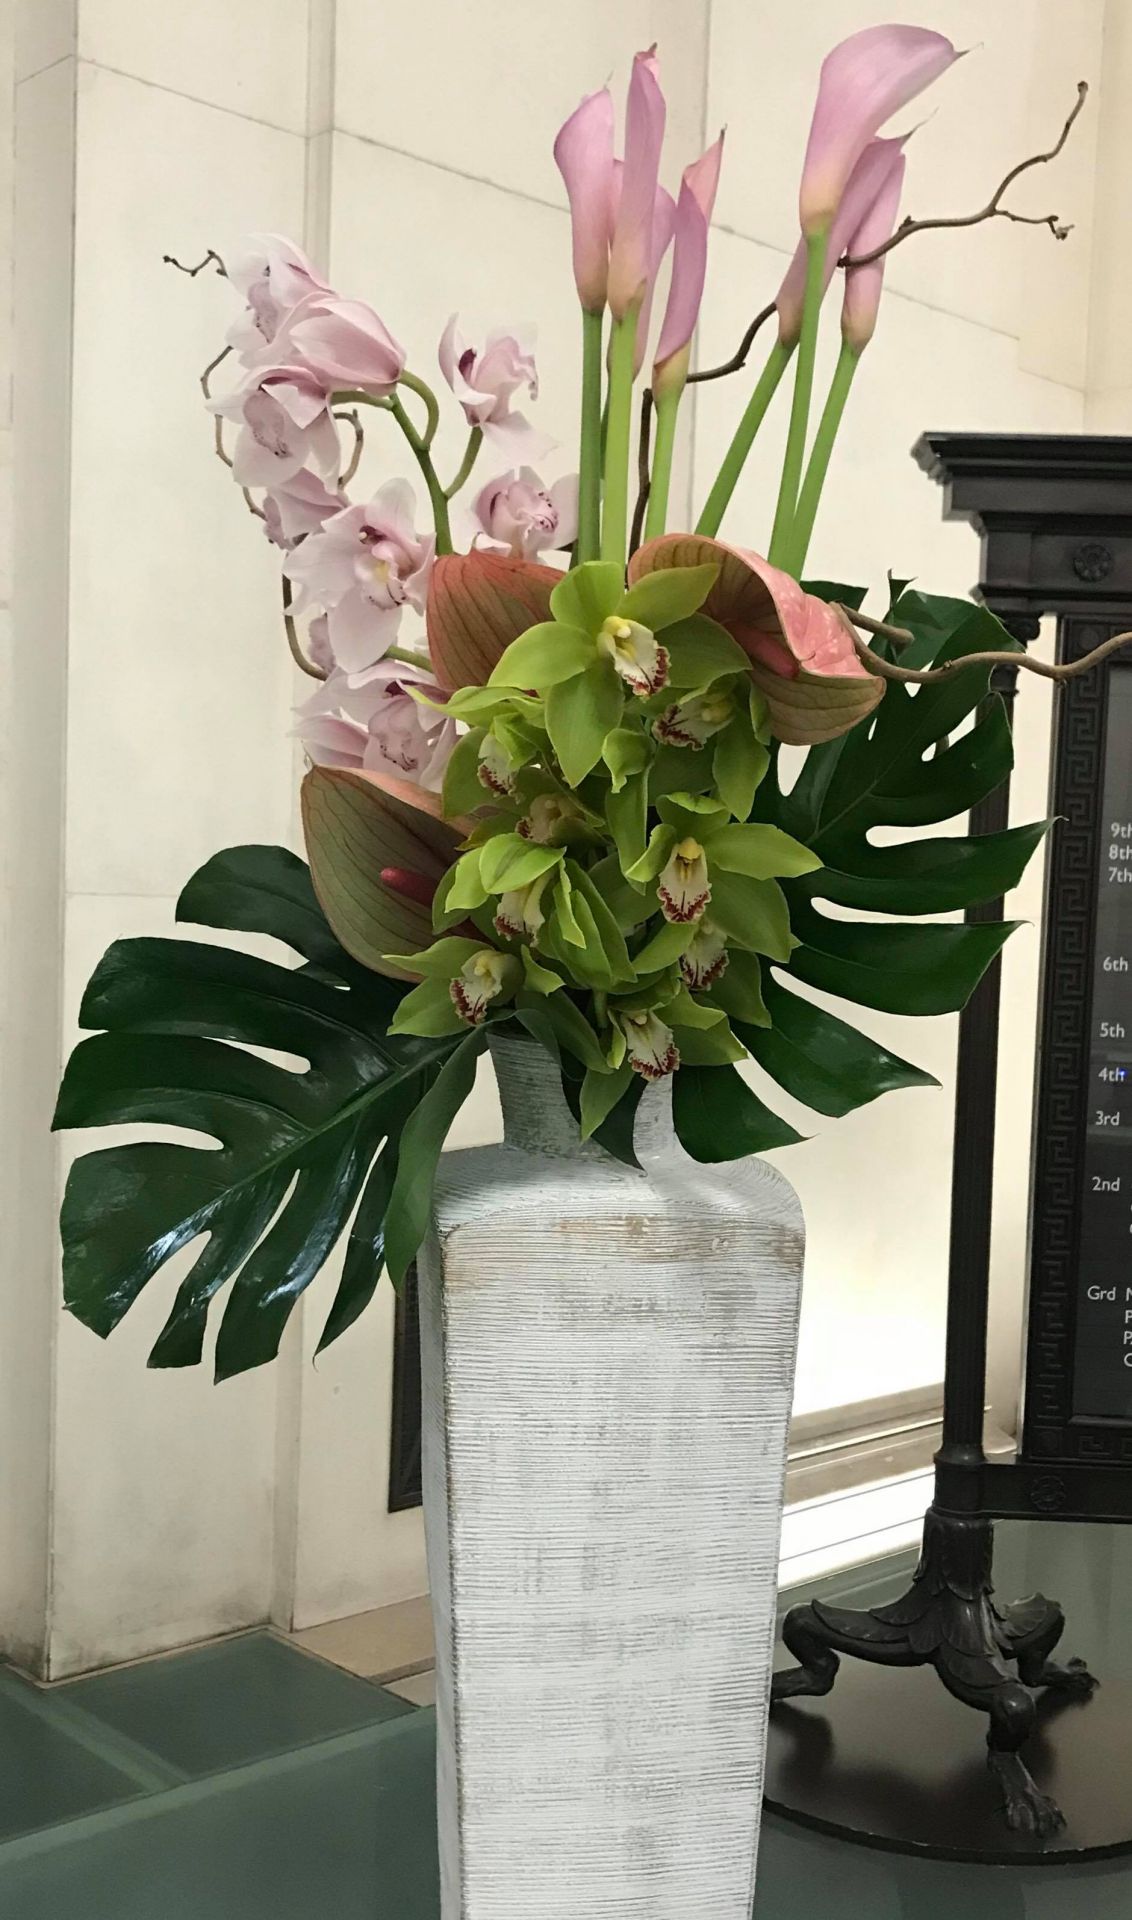 Fresh Cut Flower Arrangements for your Office or Home - Windowflowers